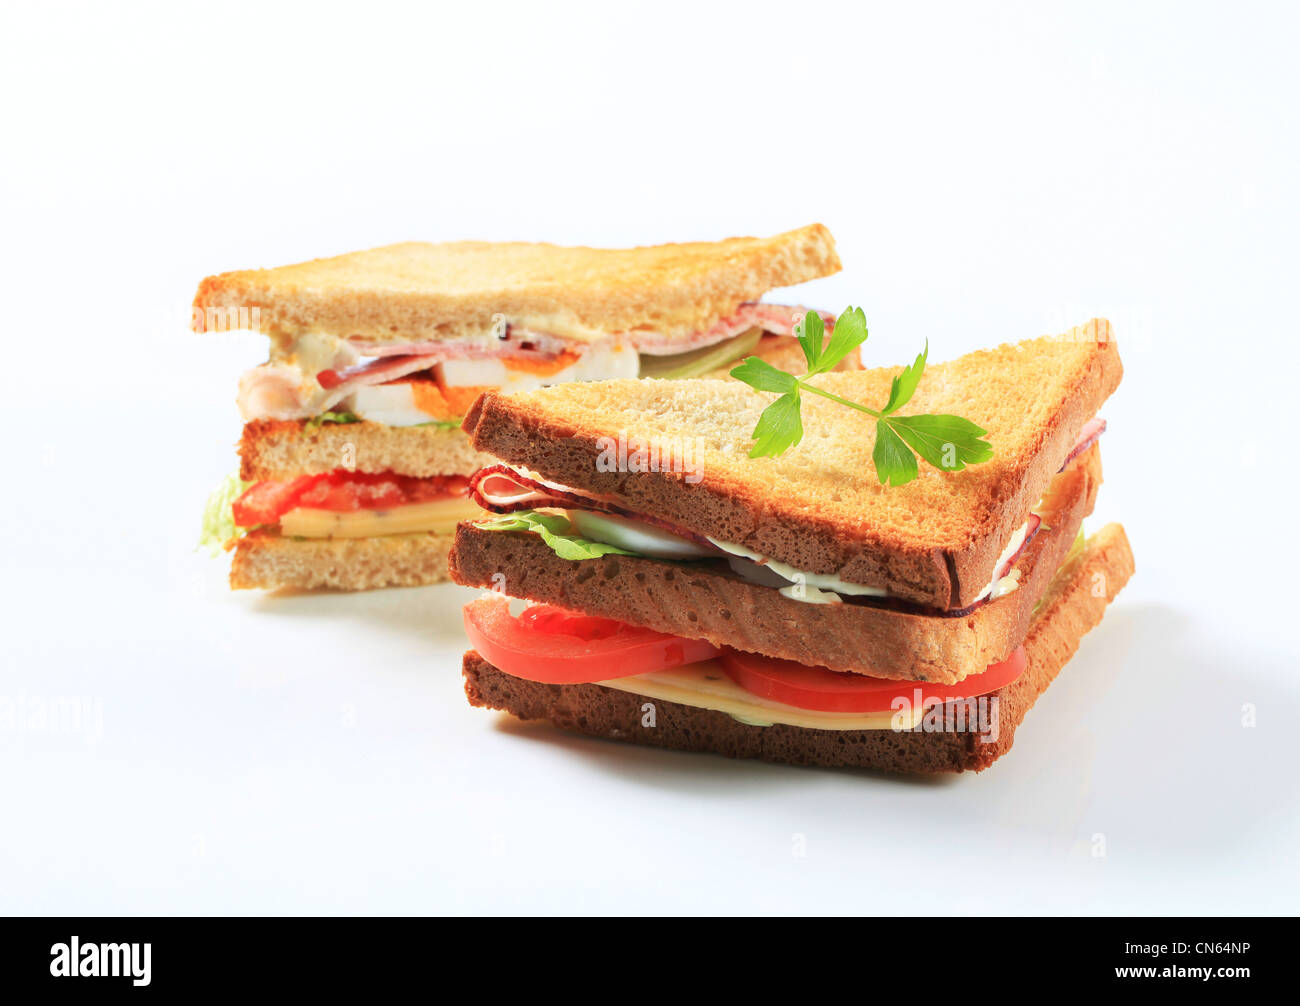 Deli Sandwiches High Resolution Stock Photography and Images - Alamy